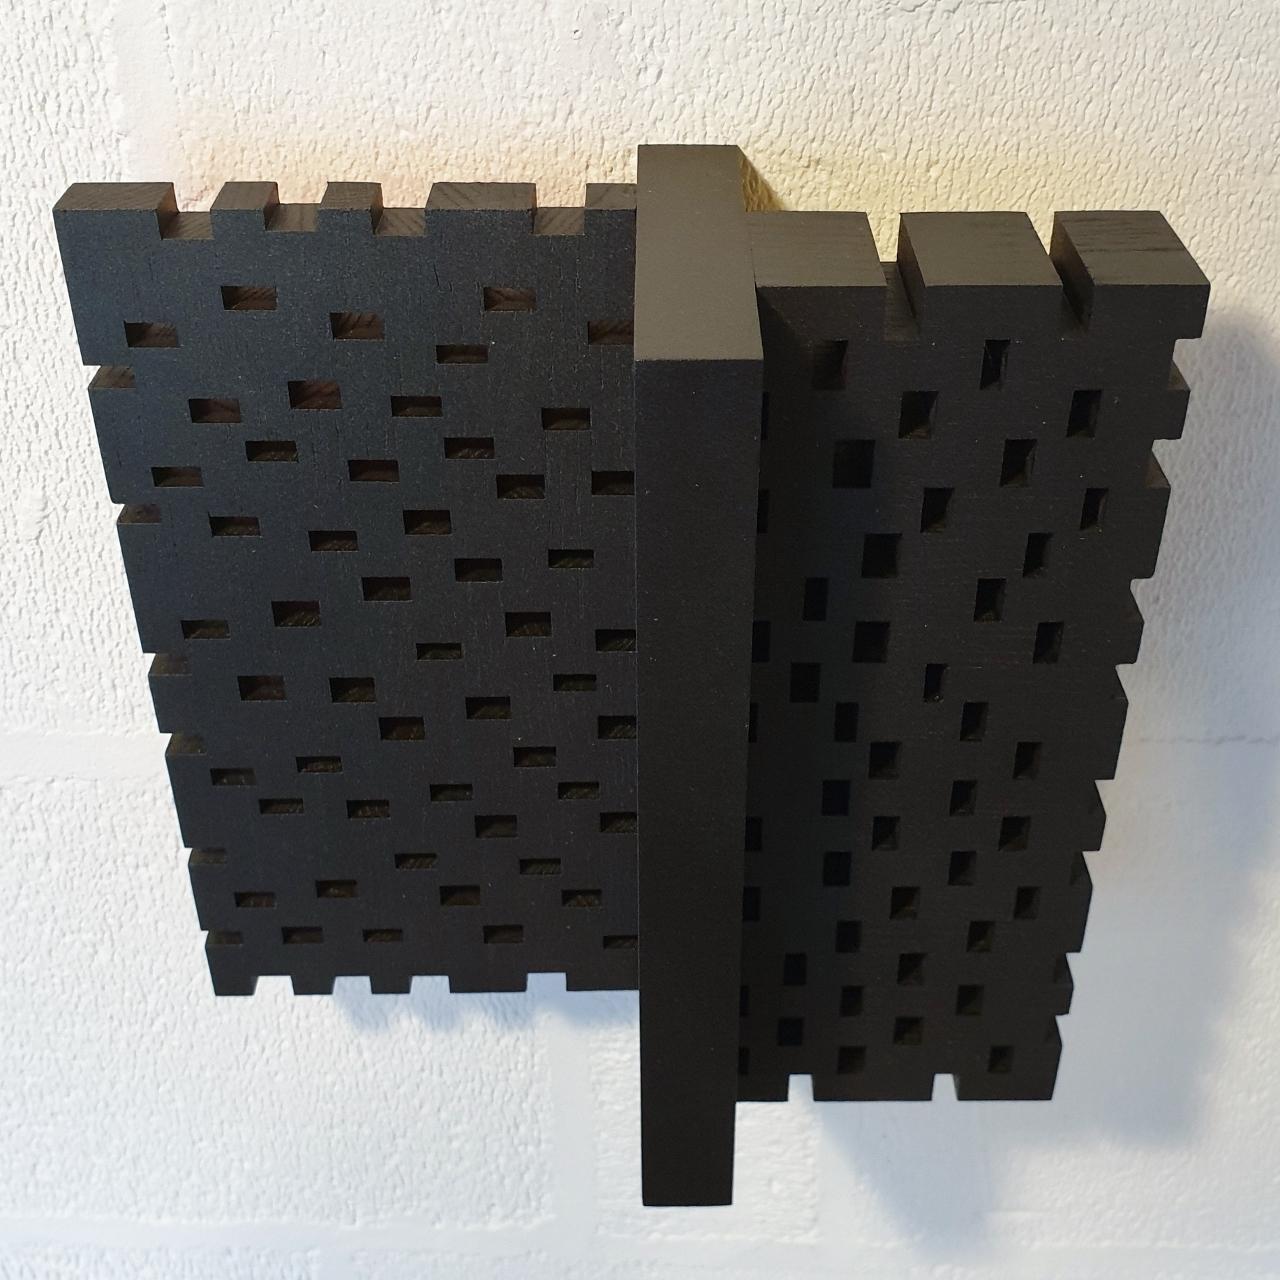 Superposition urbaine 23/30 is a medium size contemporary modern sculpture painting relief by French-Dutch artist Olivier Julia. It is made from wood and mdf, with the front side finished with his well-known mixture of anthracite grey and bronze